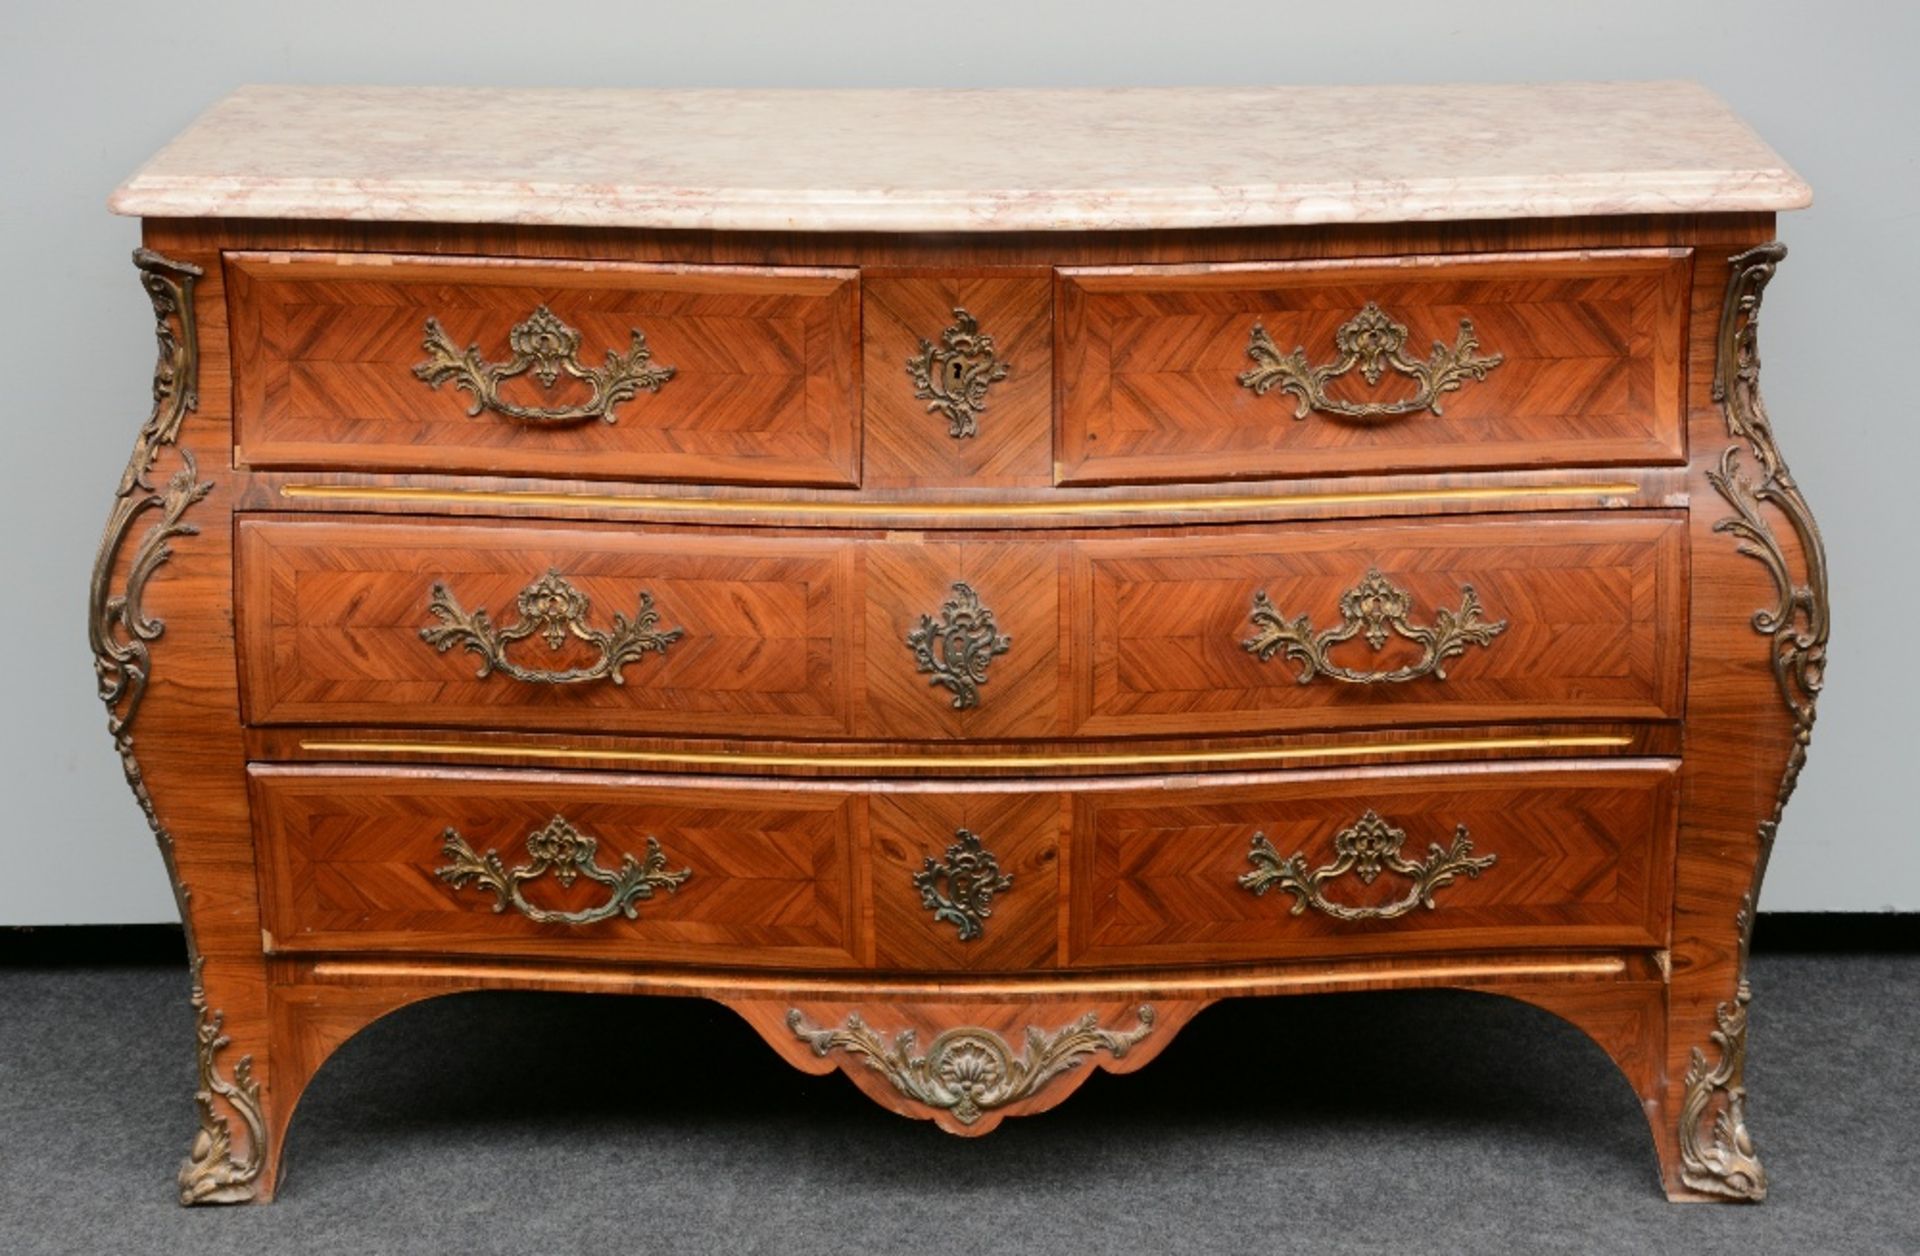 A Regency-style rosewood-marquetry commode with a marble top and fine bronze mounts, H 88 - W - Image 5 of 8